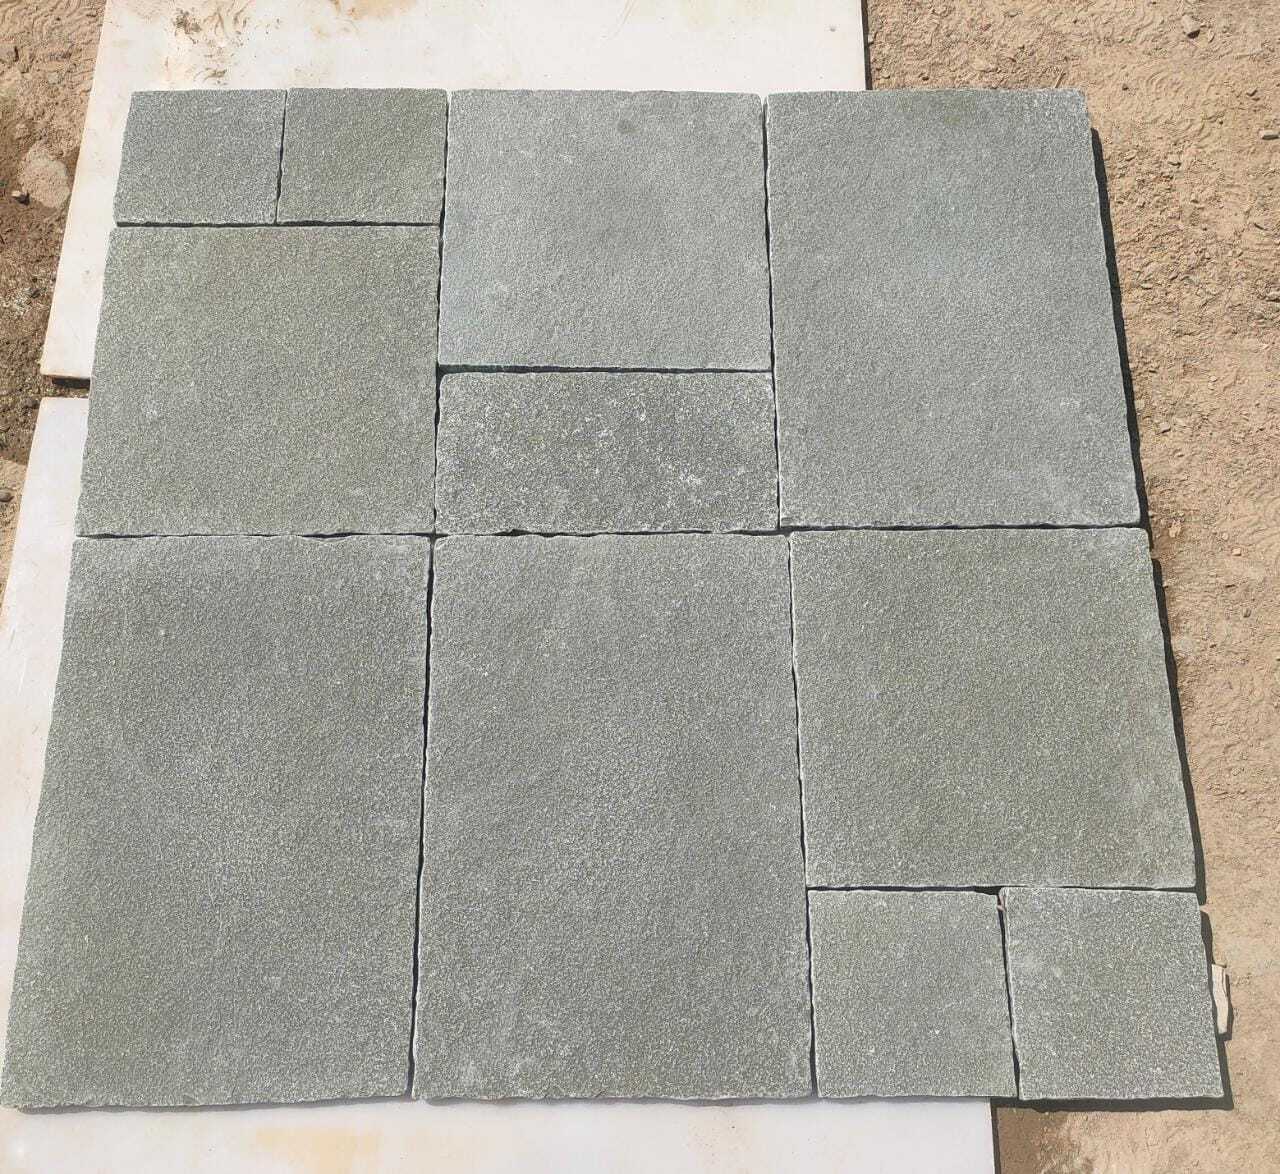 Tandur Grey Natural Indian Limestone Paving Slabs Outdoor Garden Walkway Patio Pack Pavers landscaping Stone French Pattern Tile